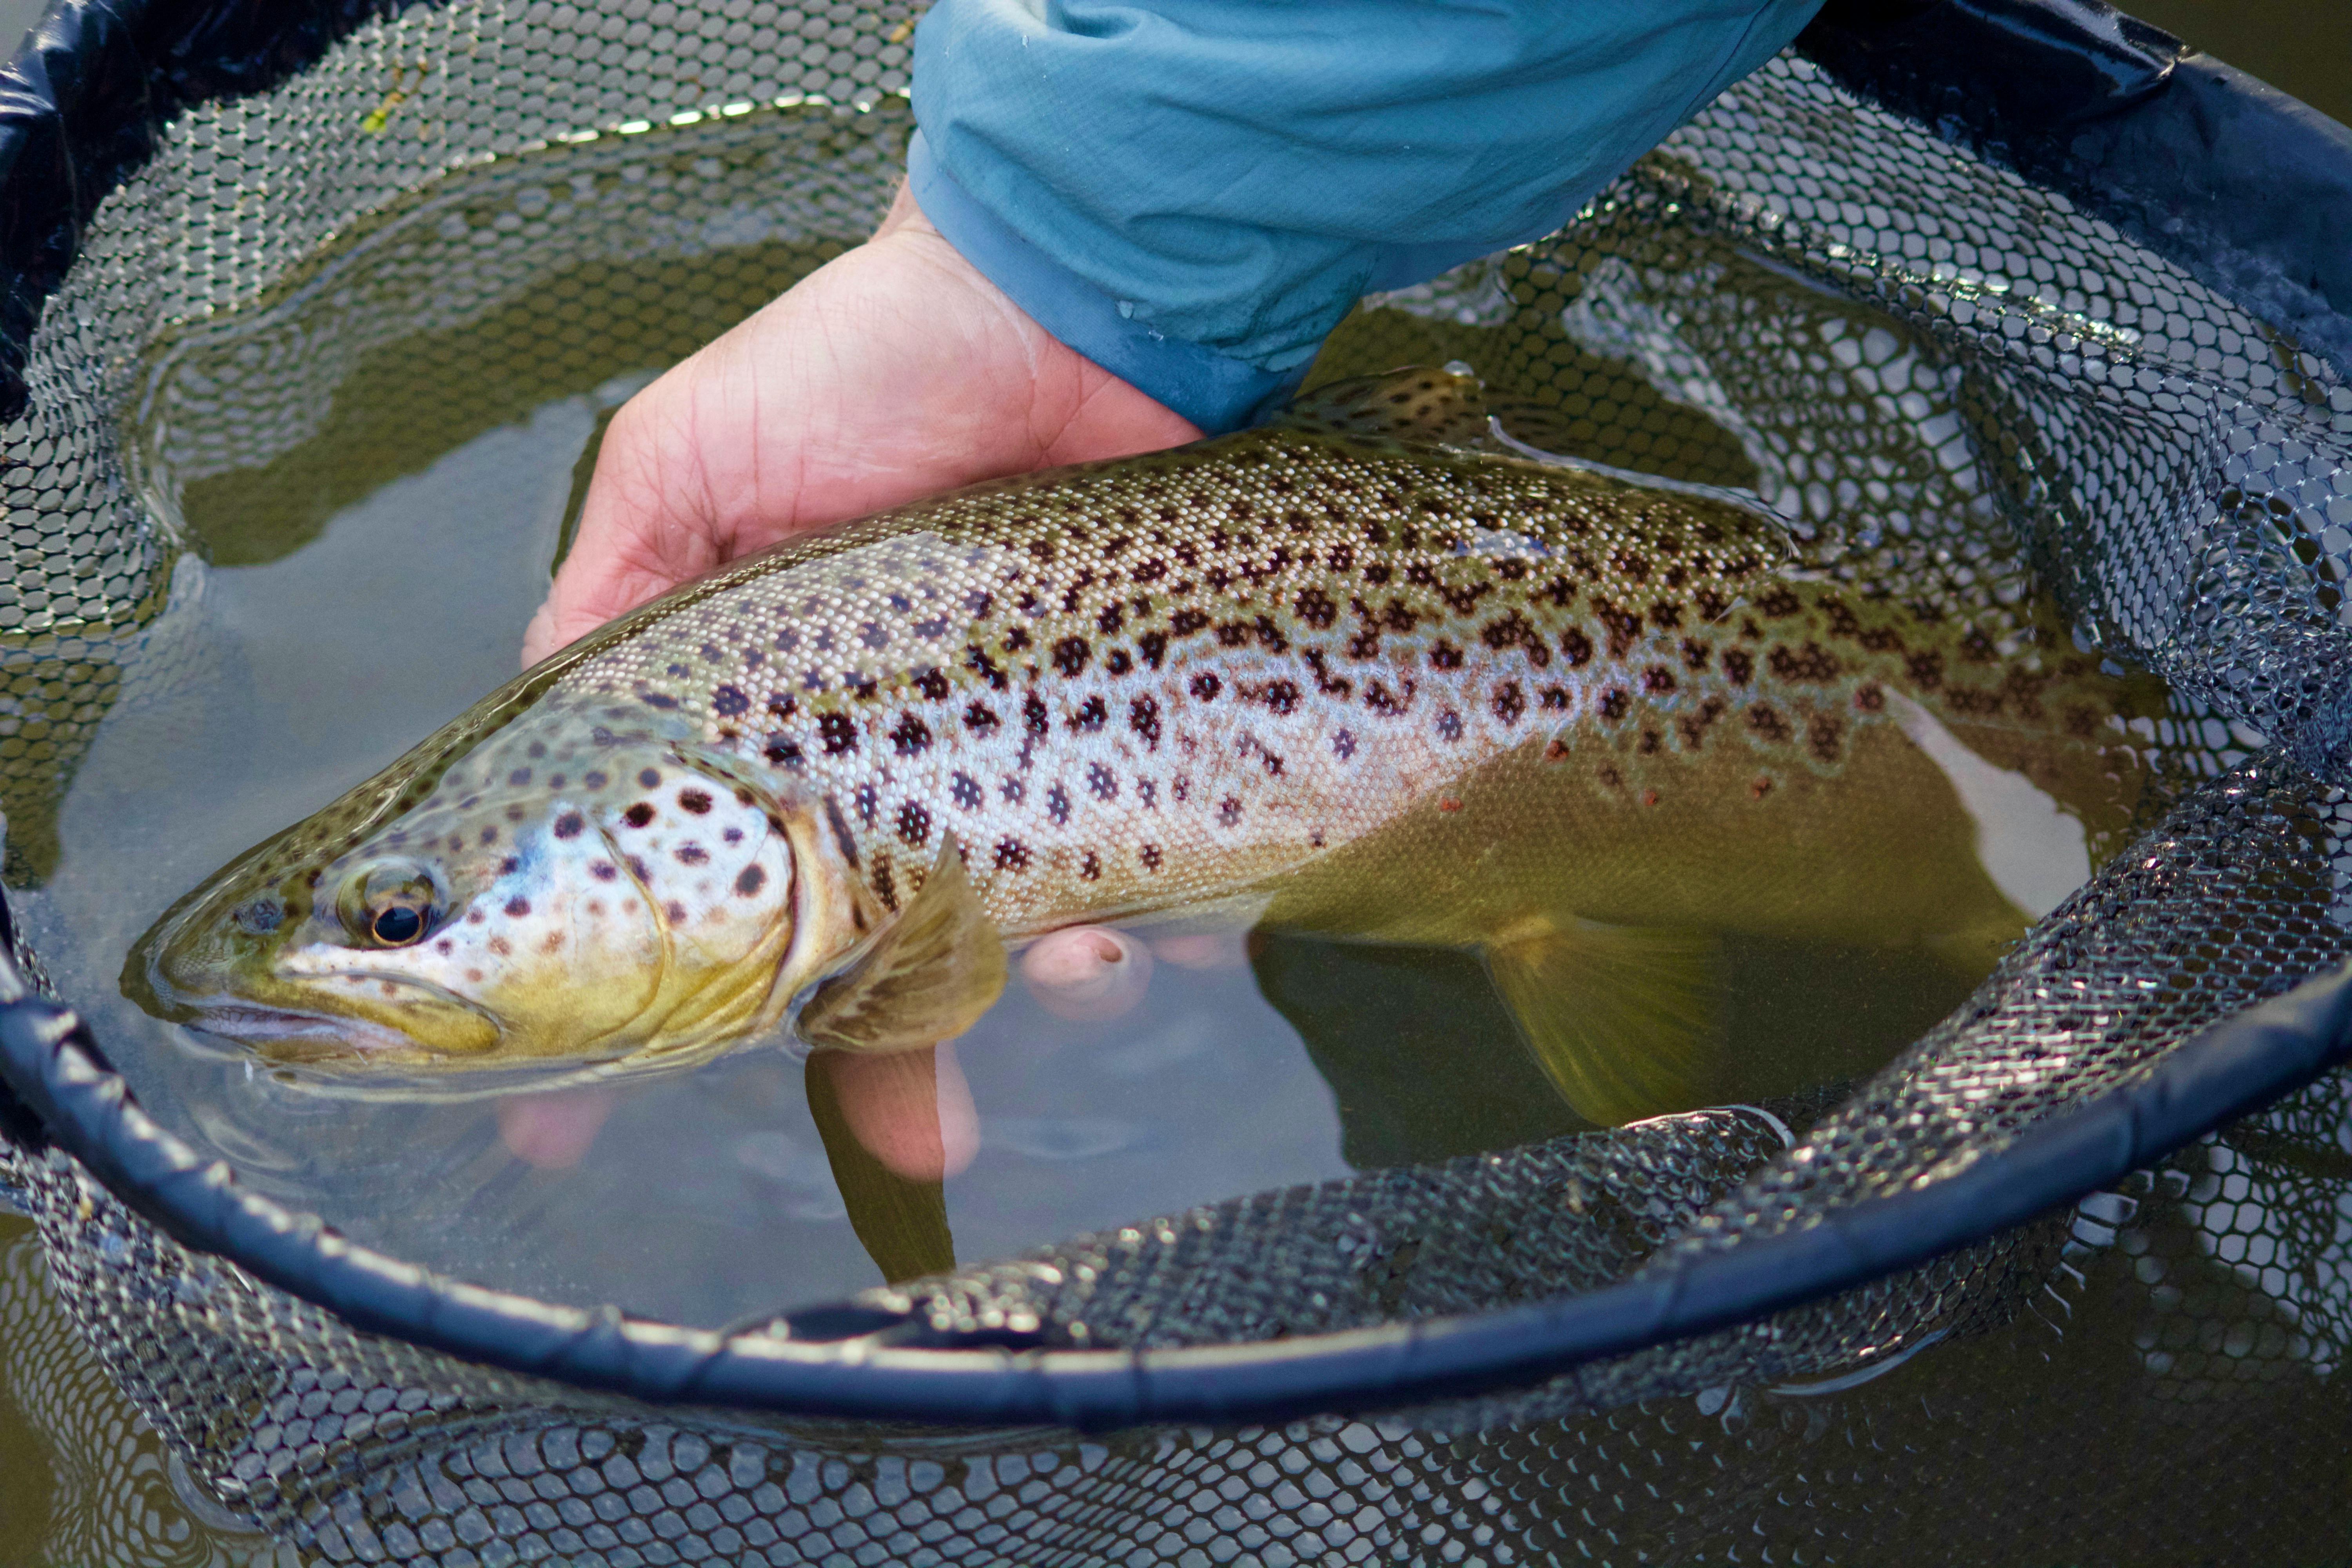 A person's hand extends into a net which has a trout in it